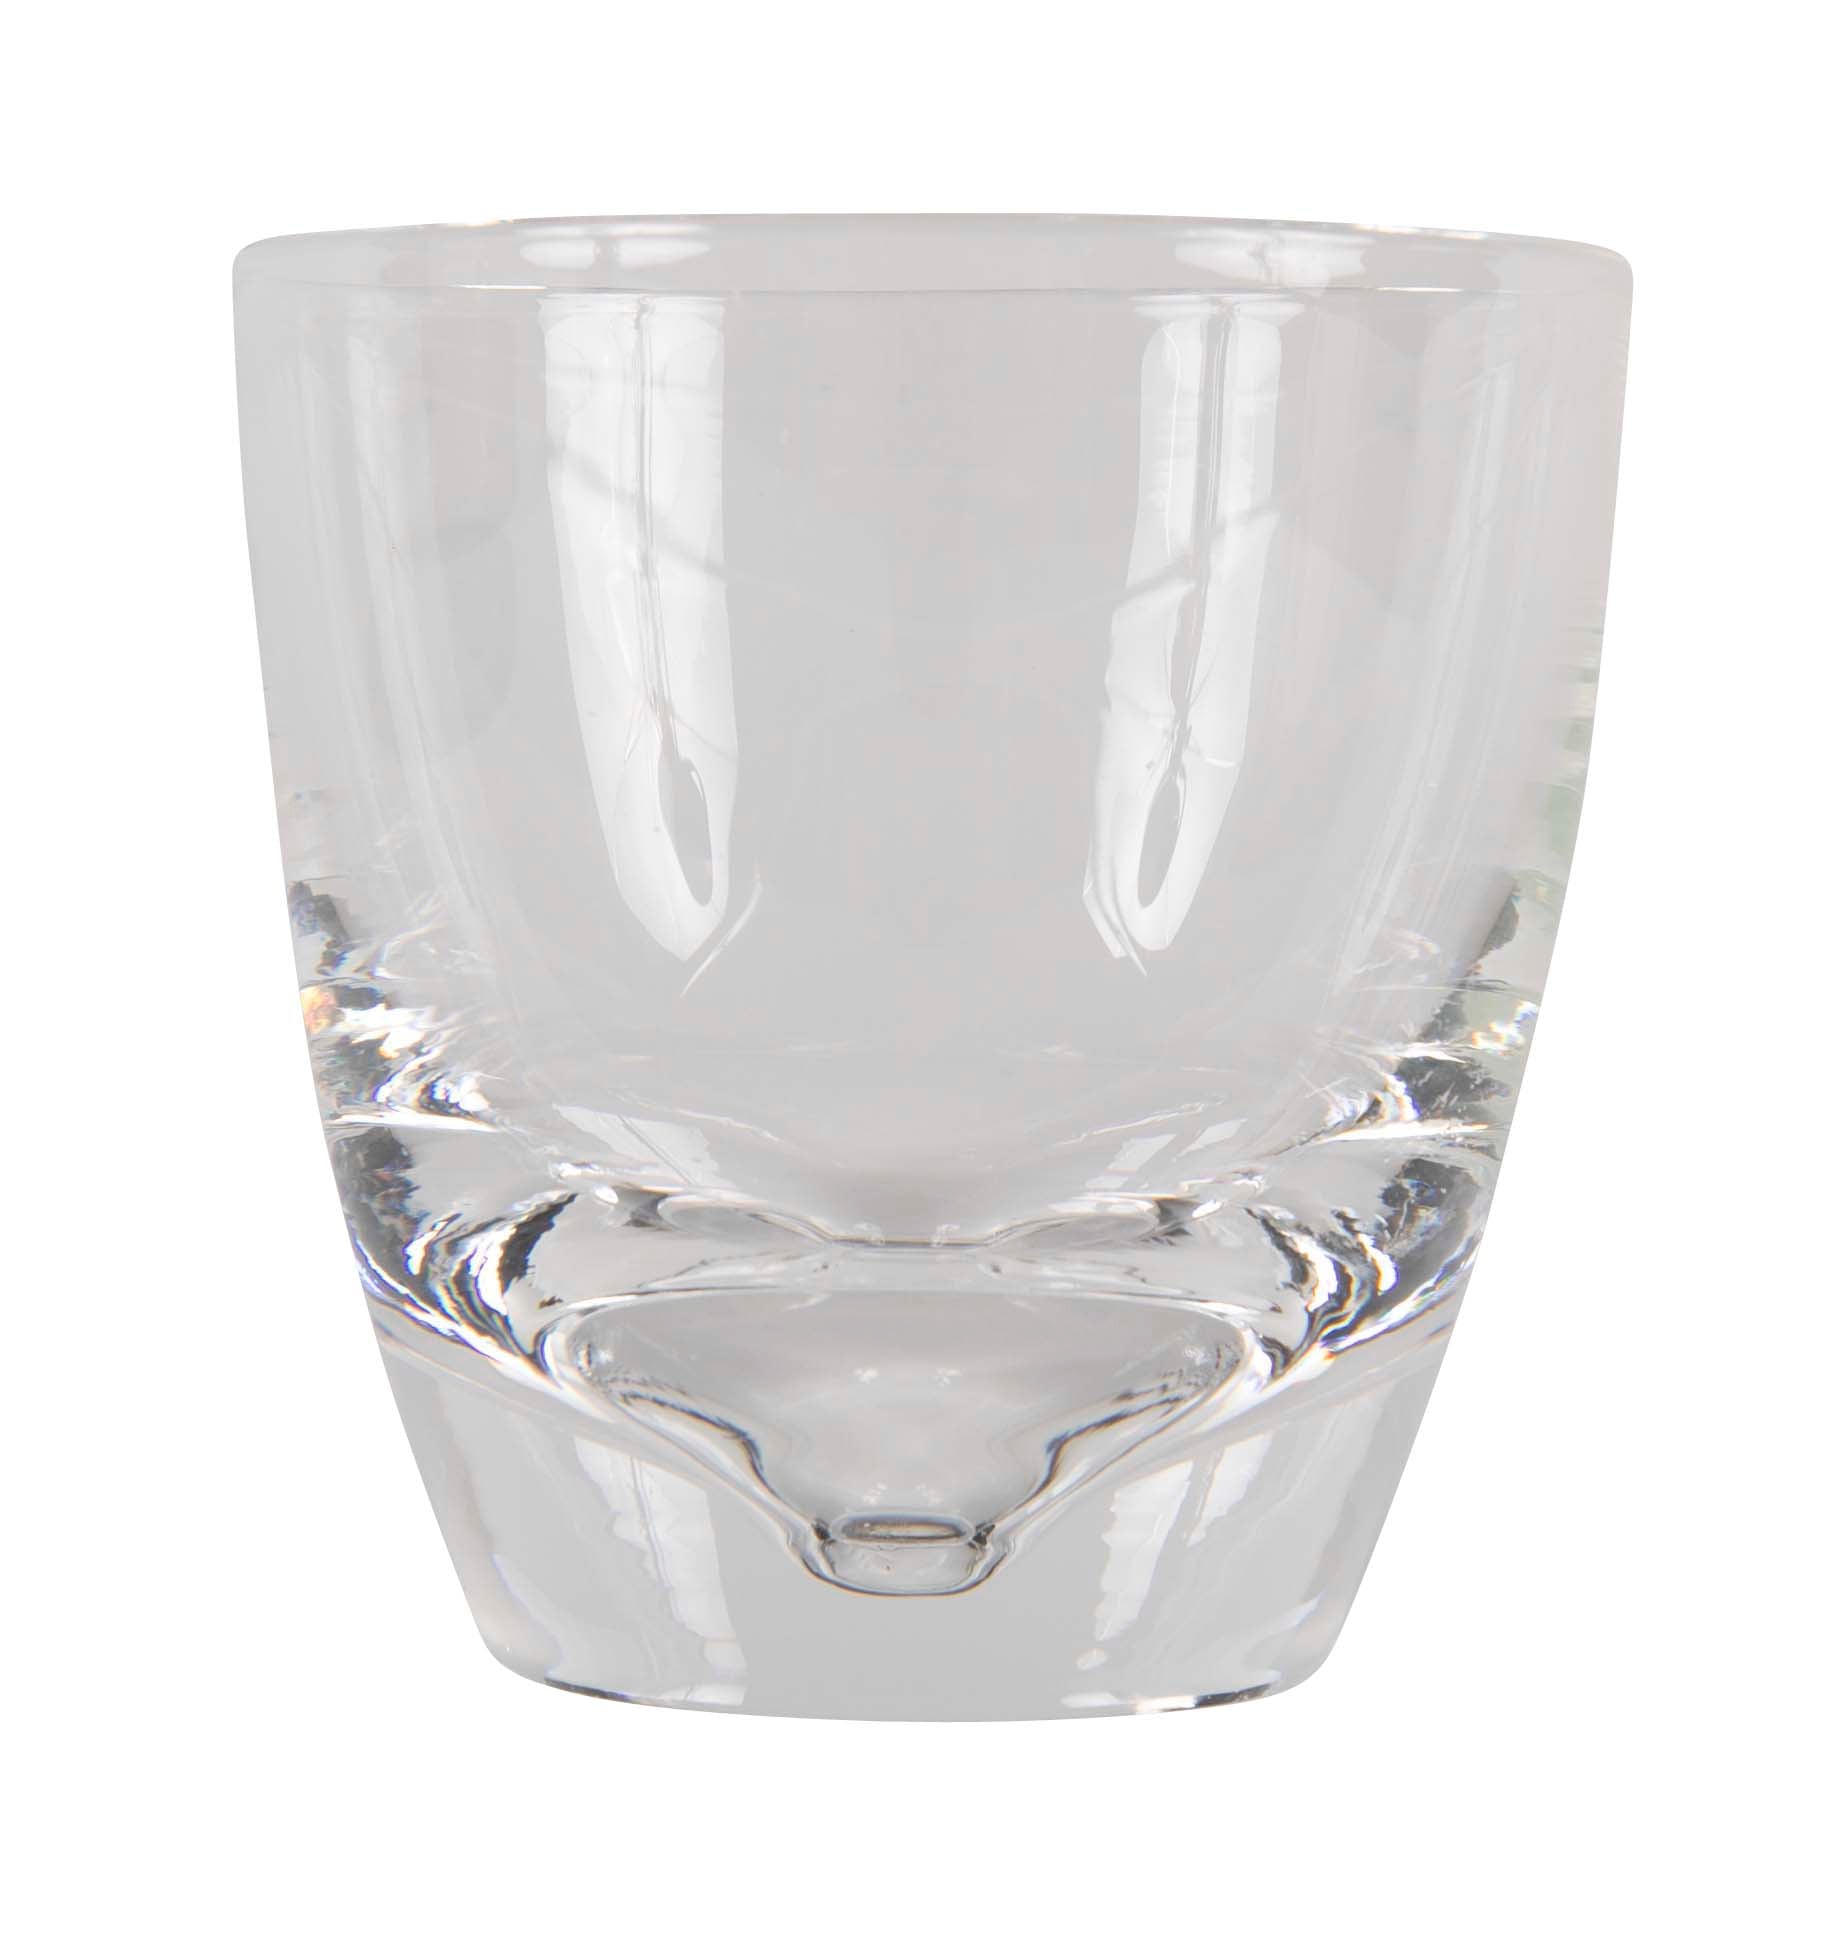 Steuben "Old Fashion" Glasses with Dimple